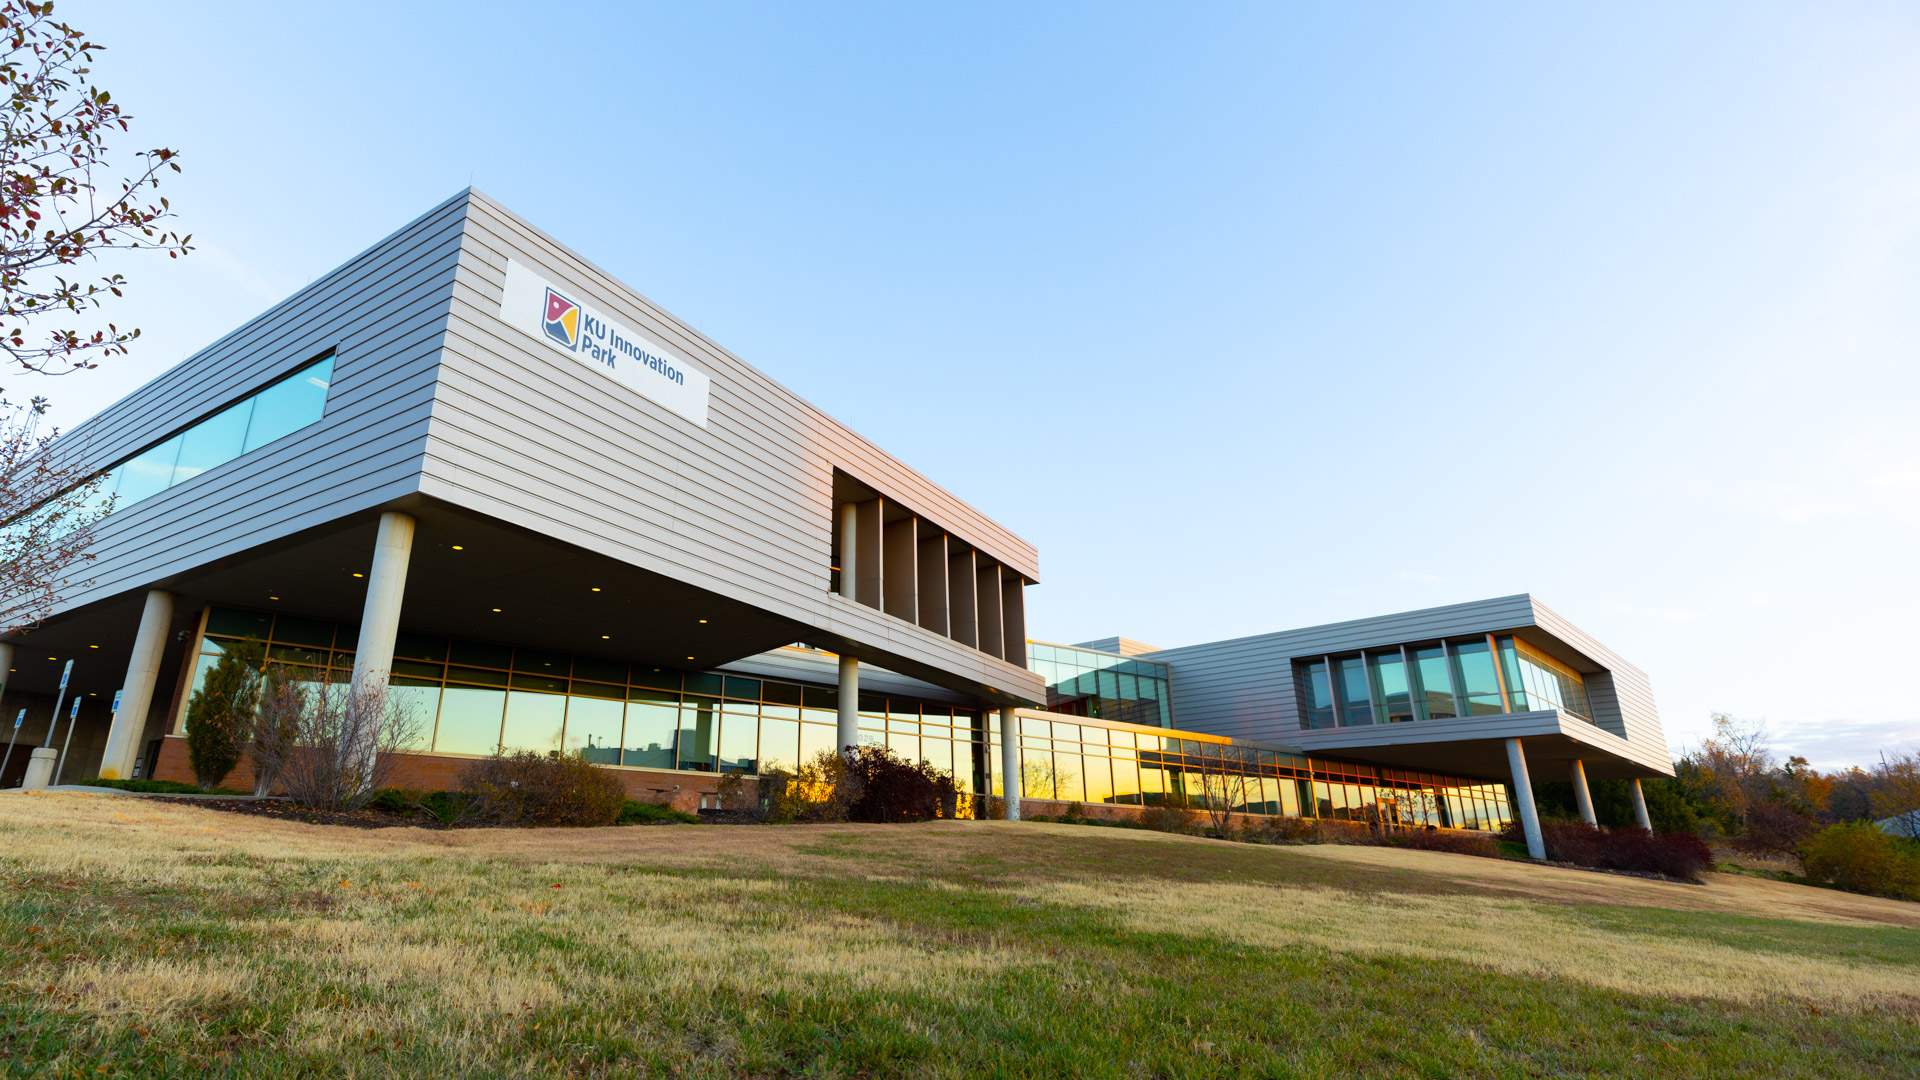 A portrait of the KU Innovation Park building from the grass.